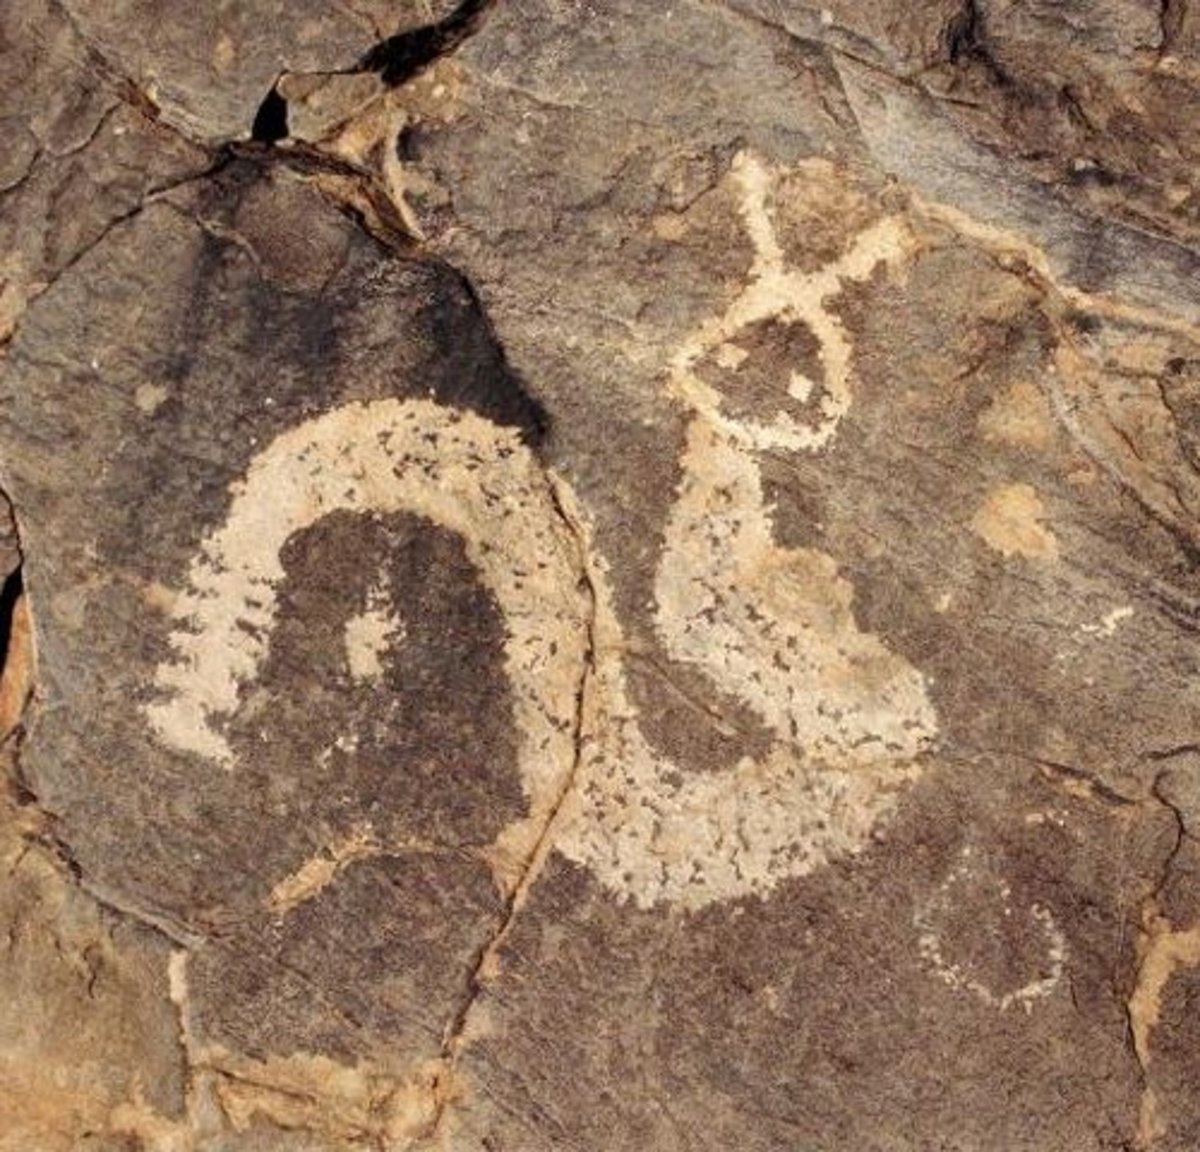 Snakerock in New Mexico, similar to all horned serpent images from many tribes.